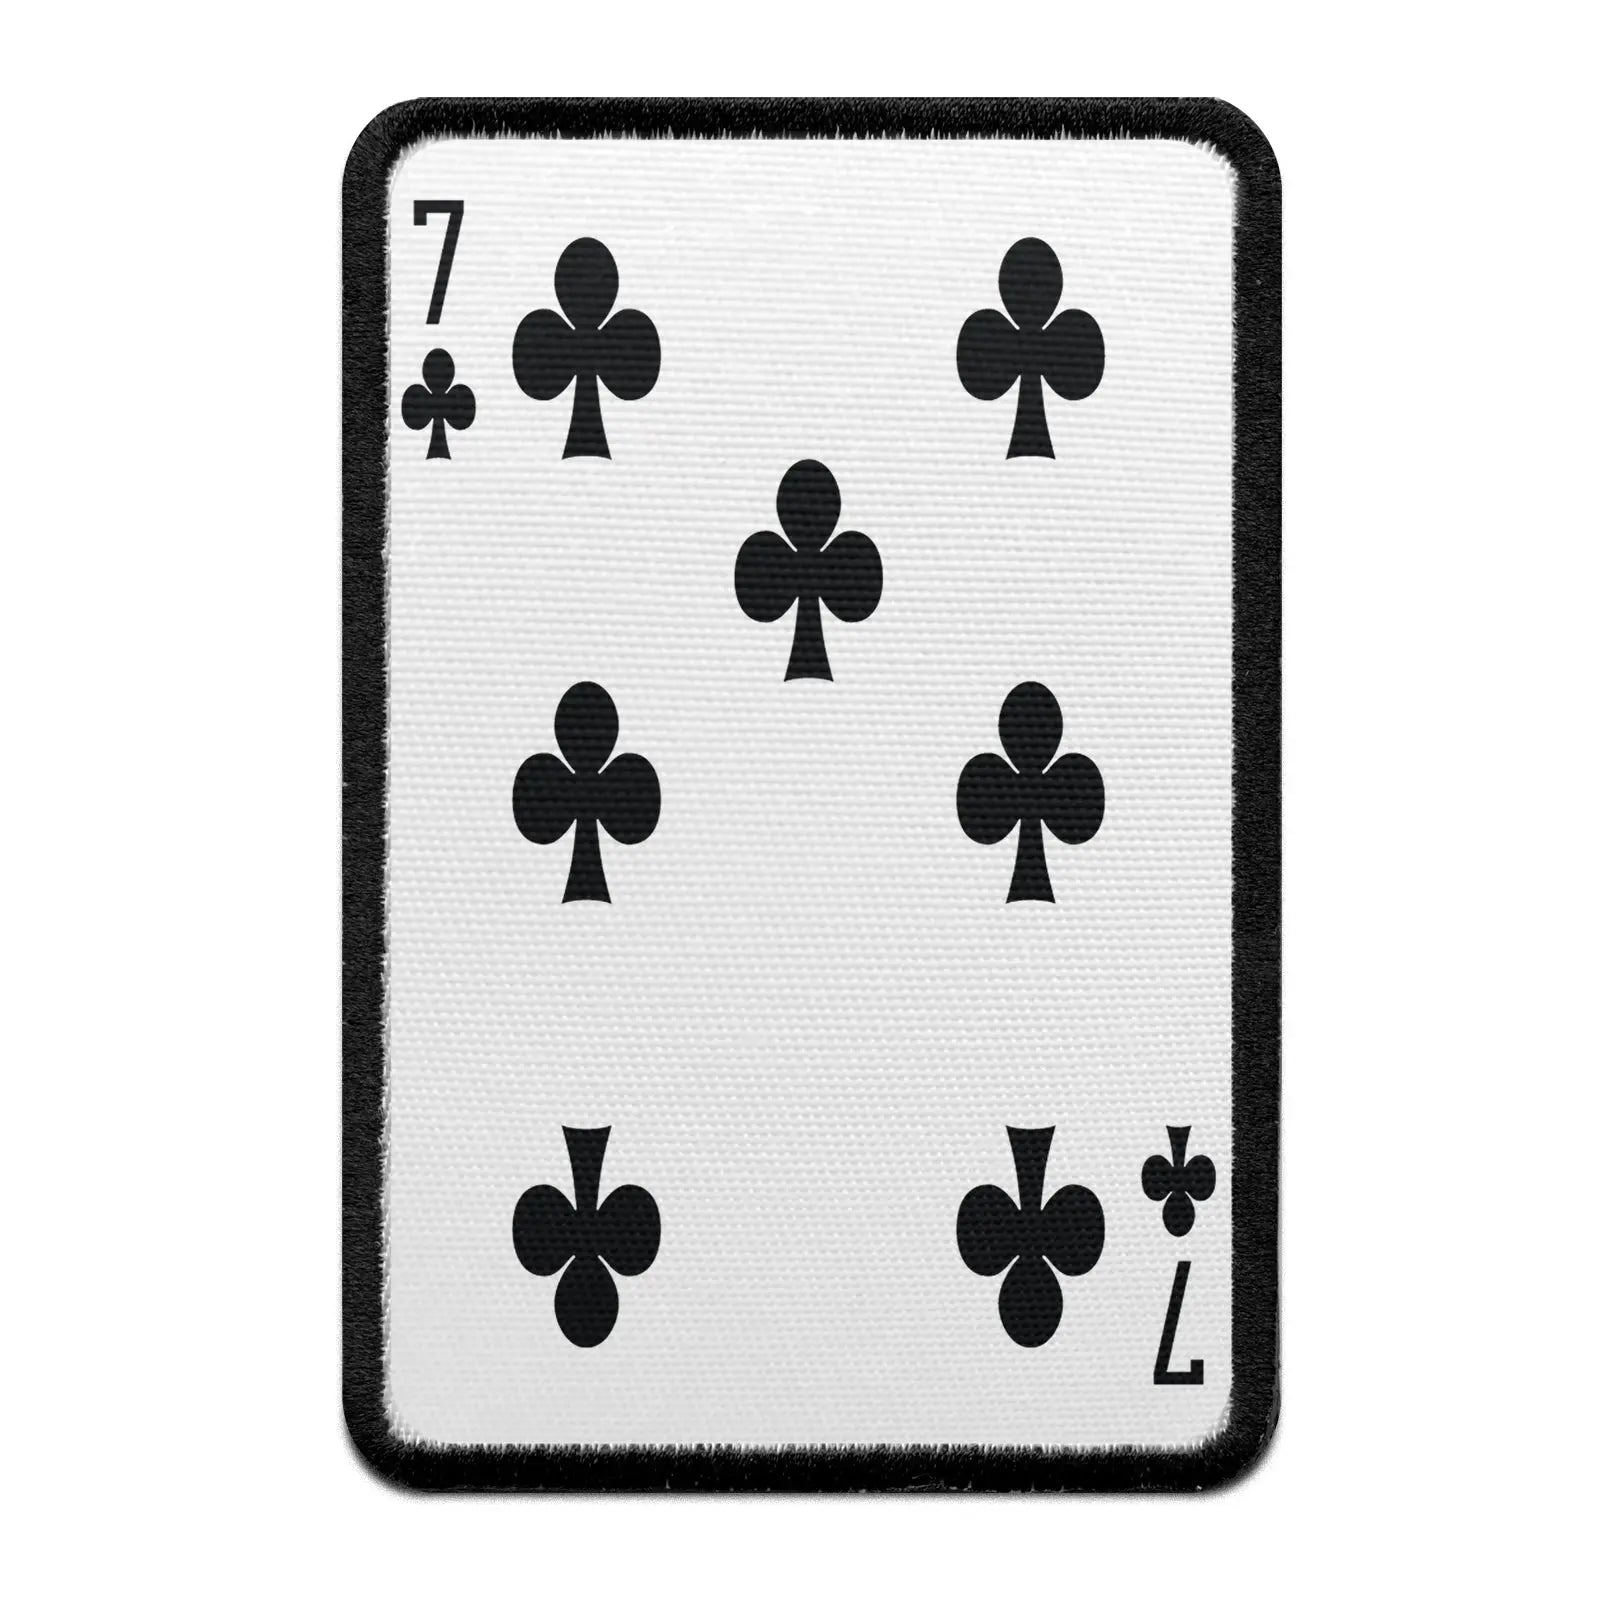 Seven Of Clubs Card FotoPatch Game Deck Embroidered Iron On 